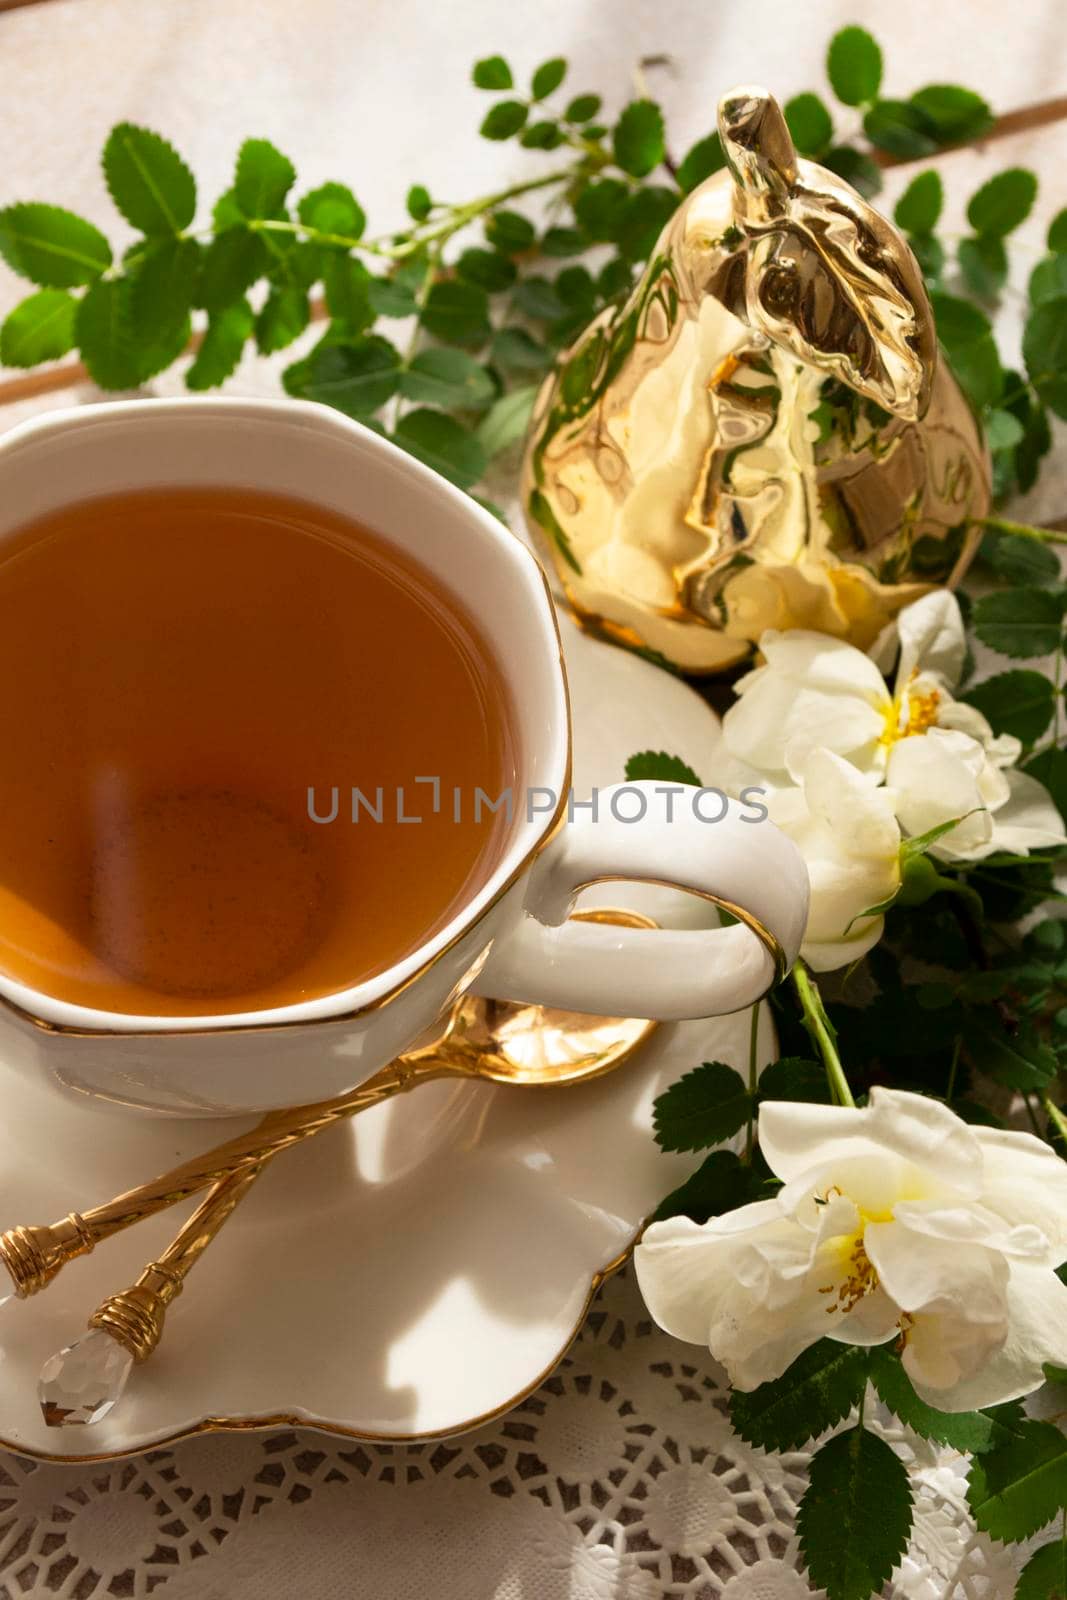 tea roses in a white cup on a wooden table. rustic style. Vertical image